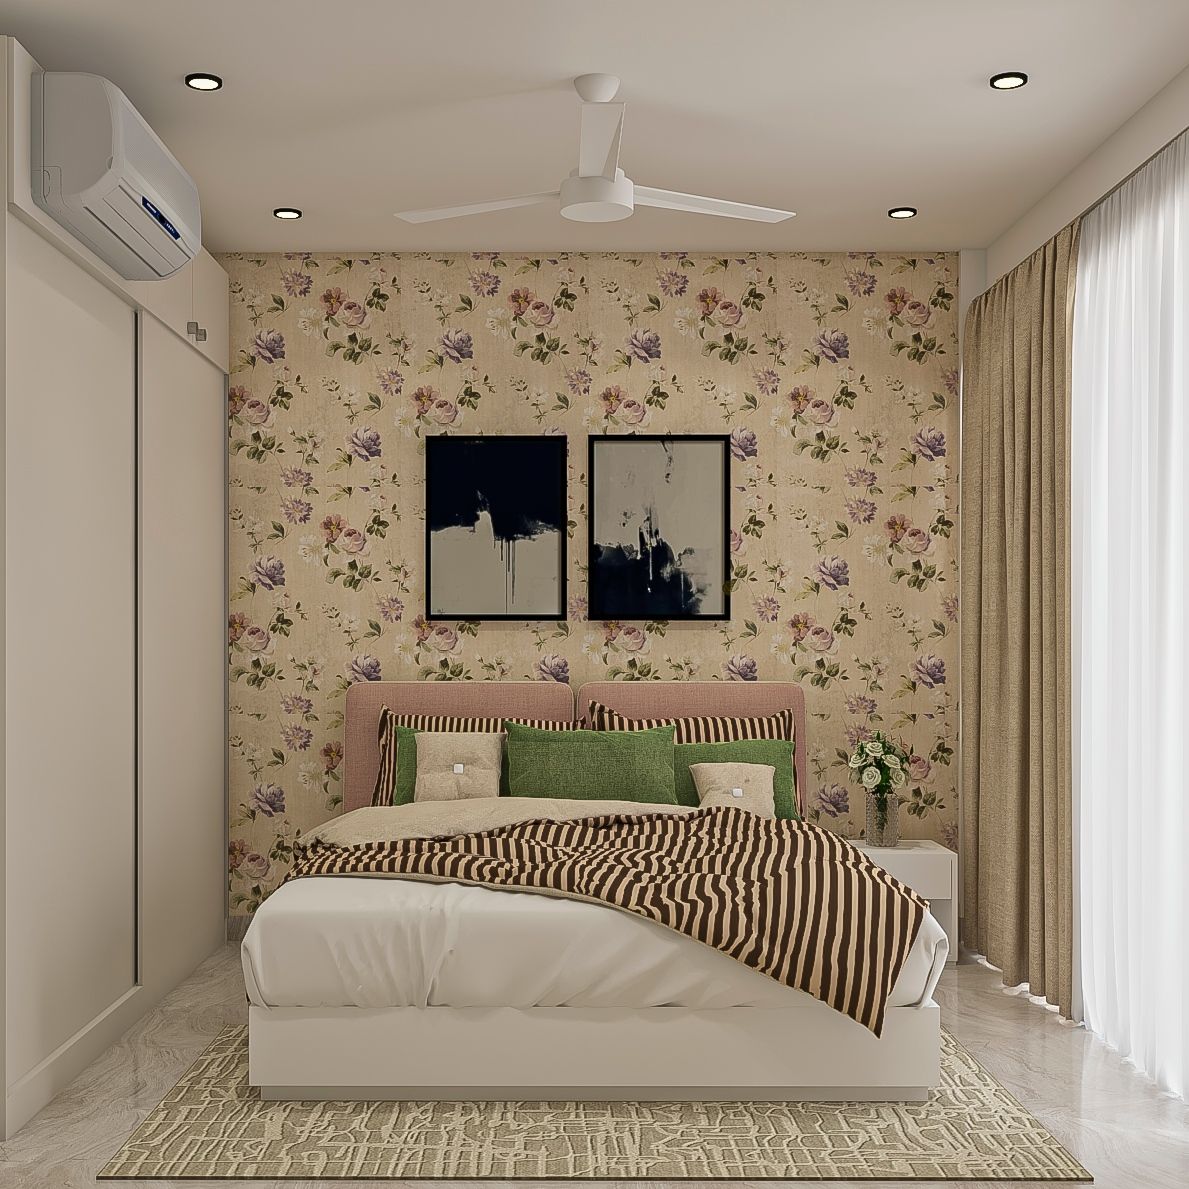 Contemporary Guest Room Design With Beige Floral Wallpaper